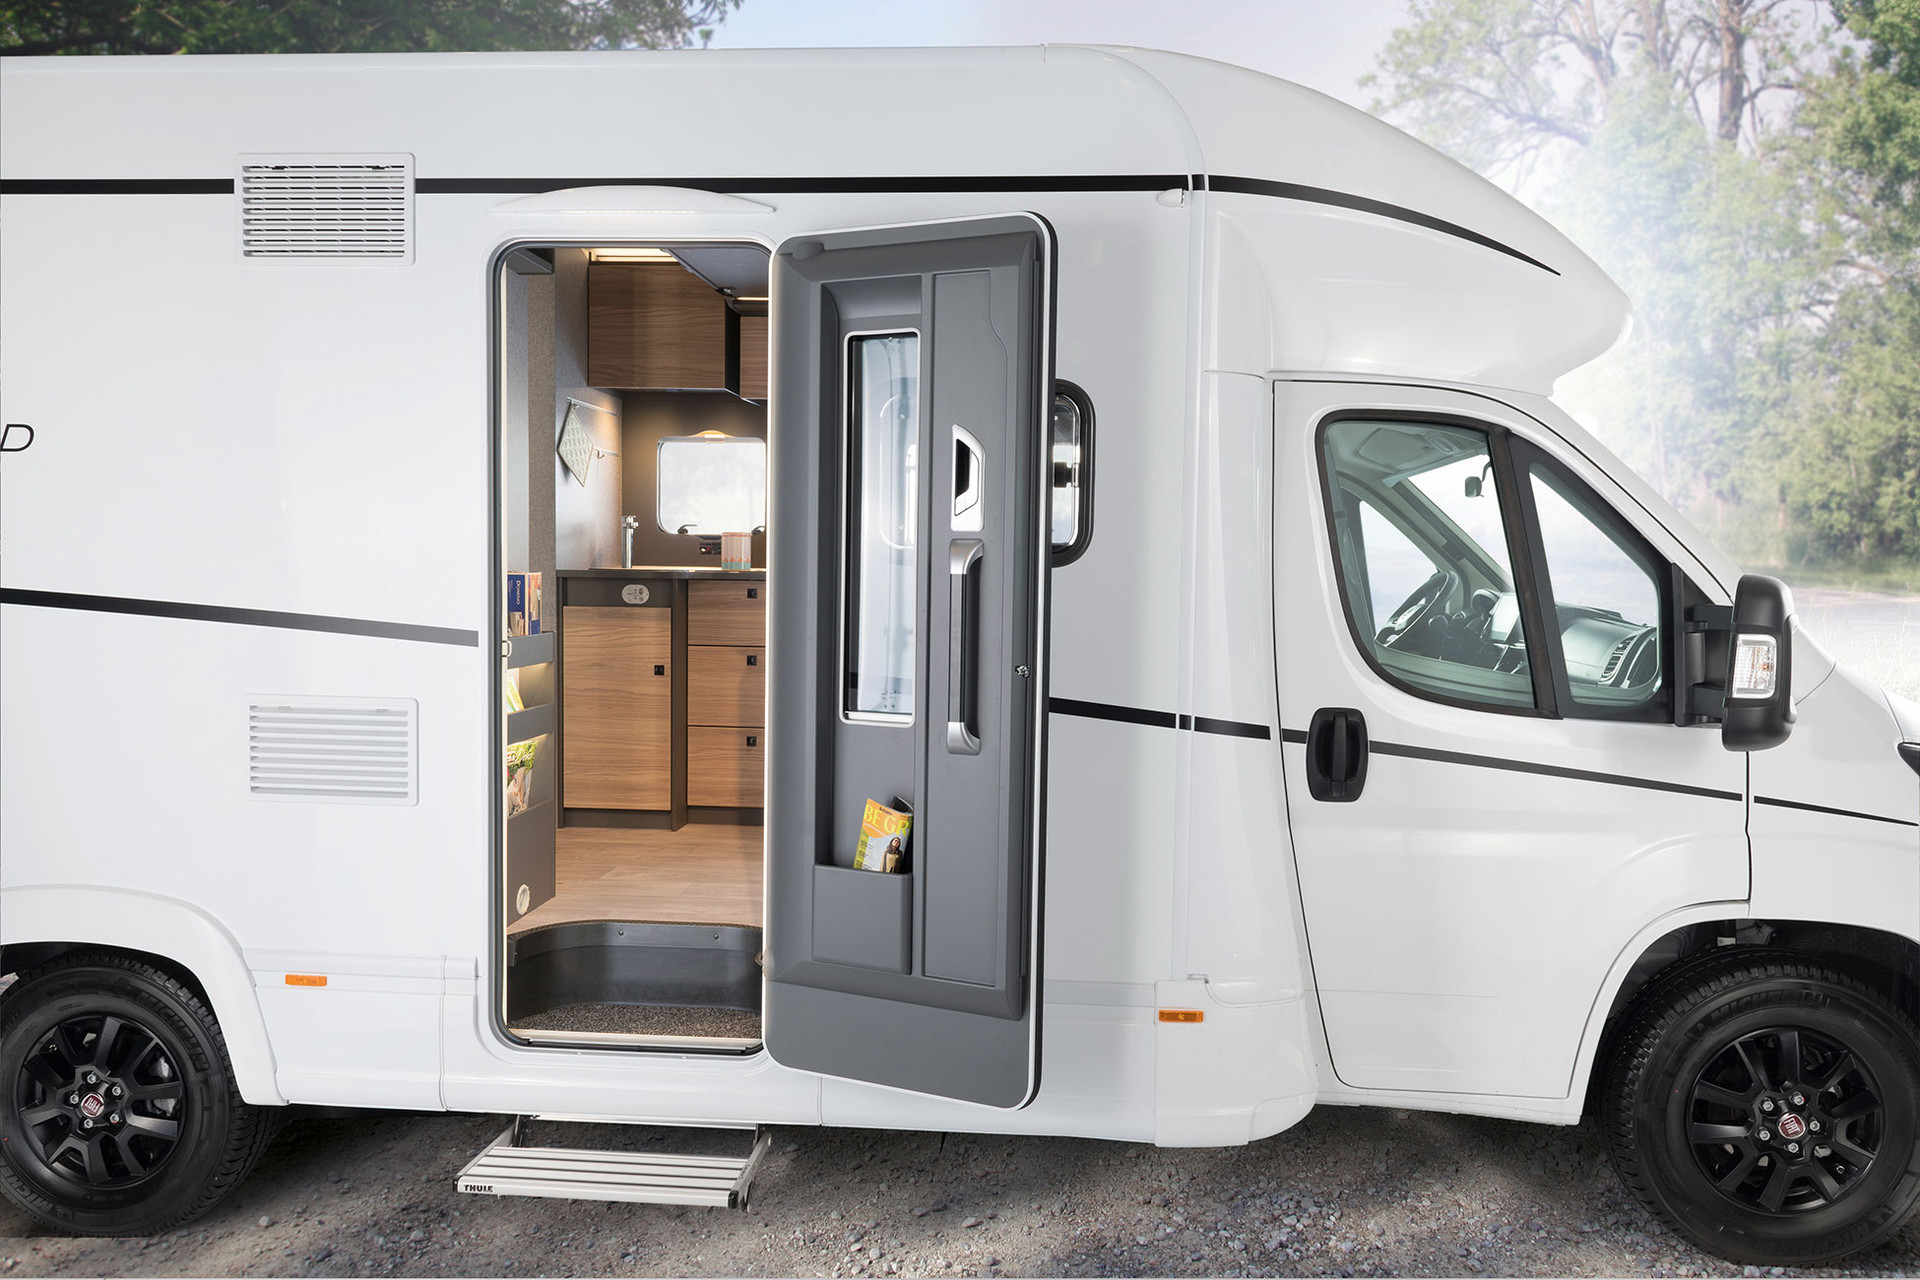 The 70 cm-wide comfort habitation door, coupé entrance and electric step make getting in and out of the vehicle a breeze.